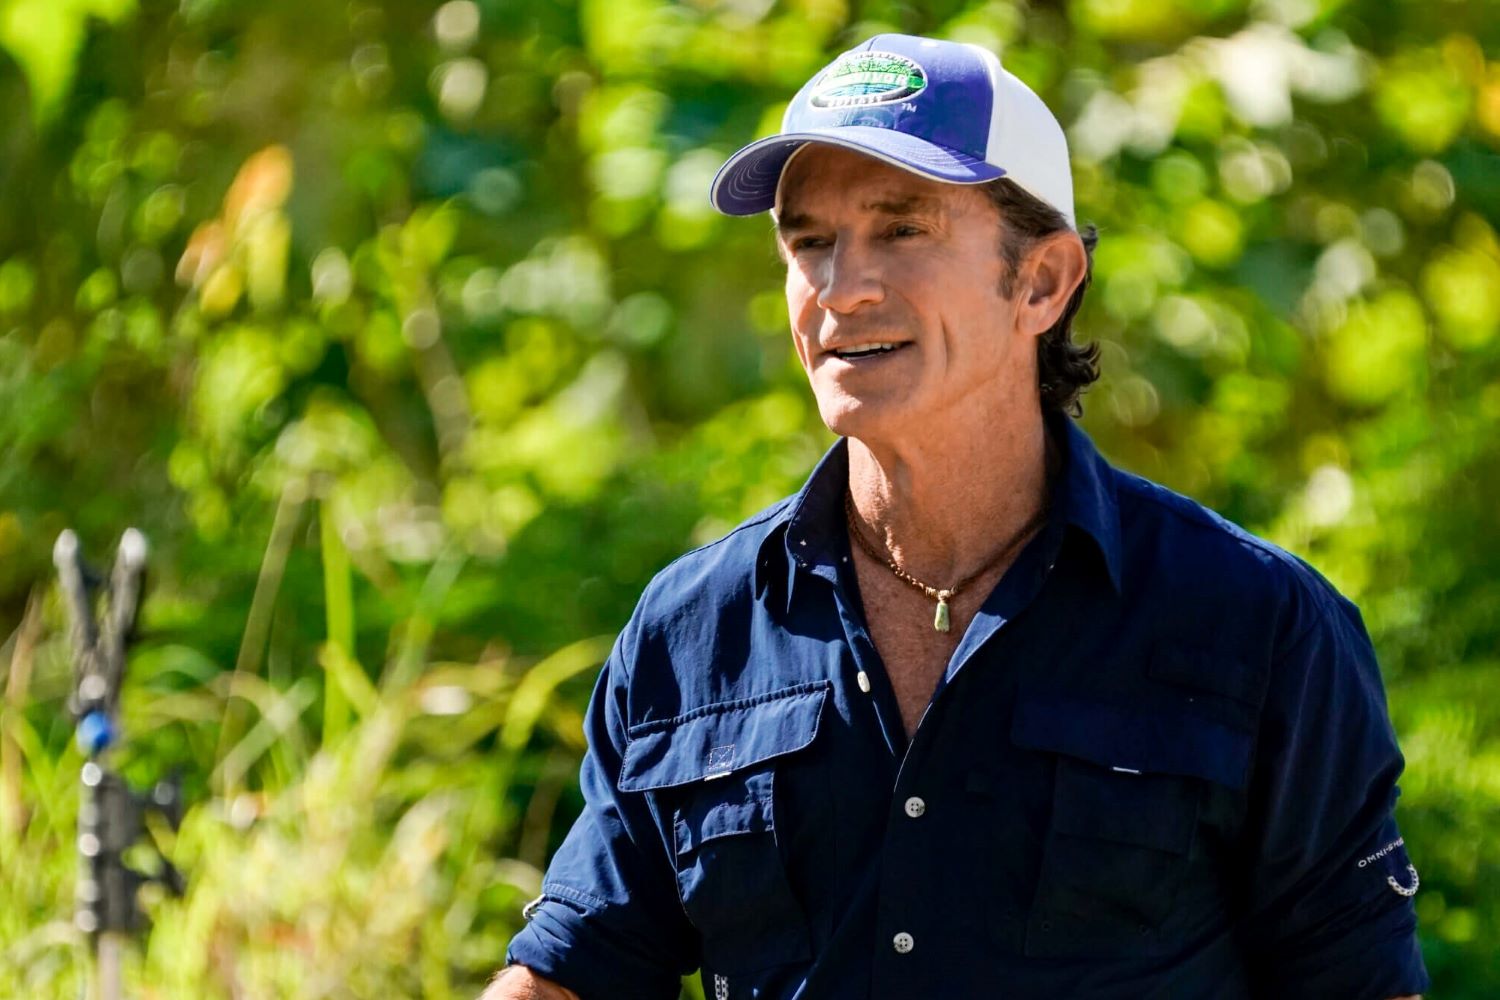 Jeff Probst, who recently confirmed 'Survivor' Season 44 showmance spoilers, wears a dark blue button-up shirt and a blue and white 'Survivor' baseball cap.